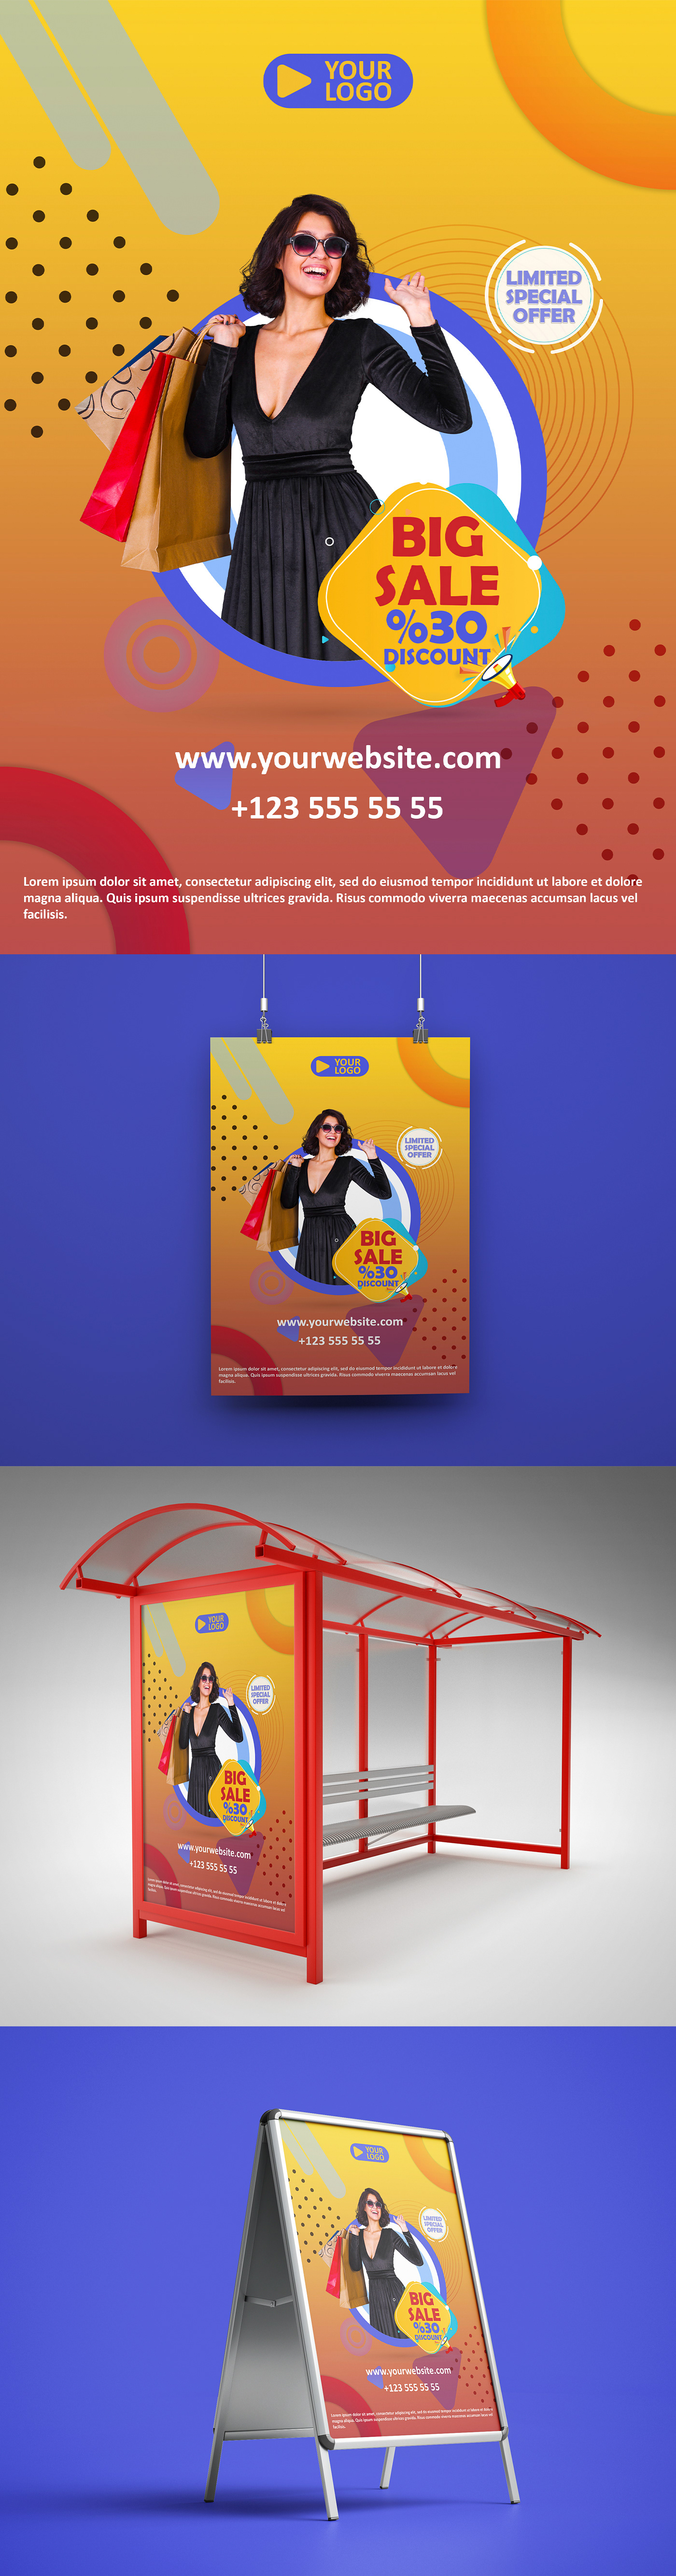 DESİGN FREE FREE DESİGN PSD SPORTS download free poster flyer free psd template